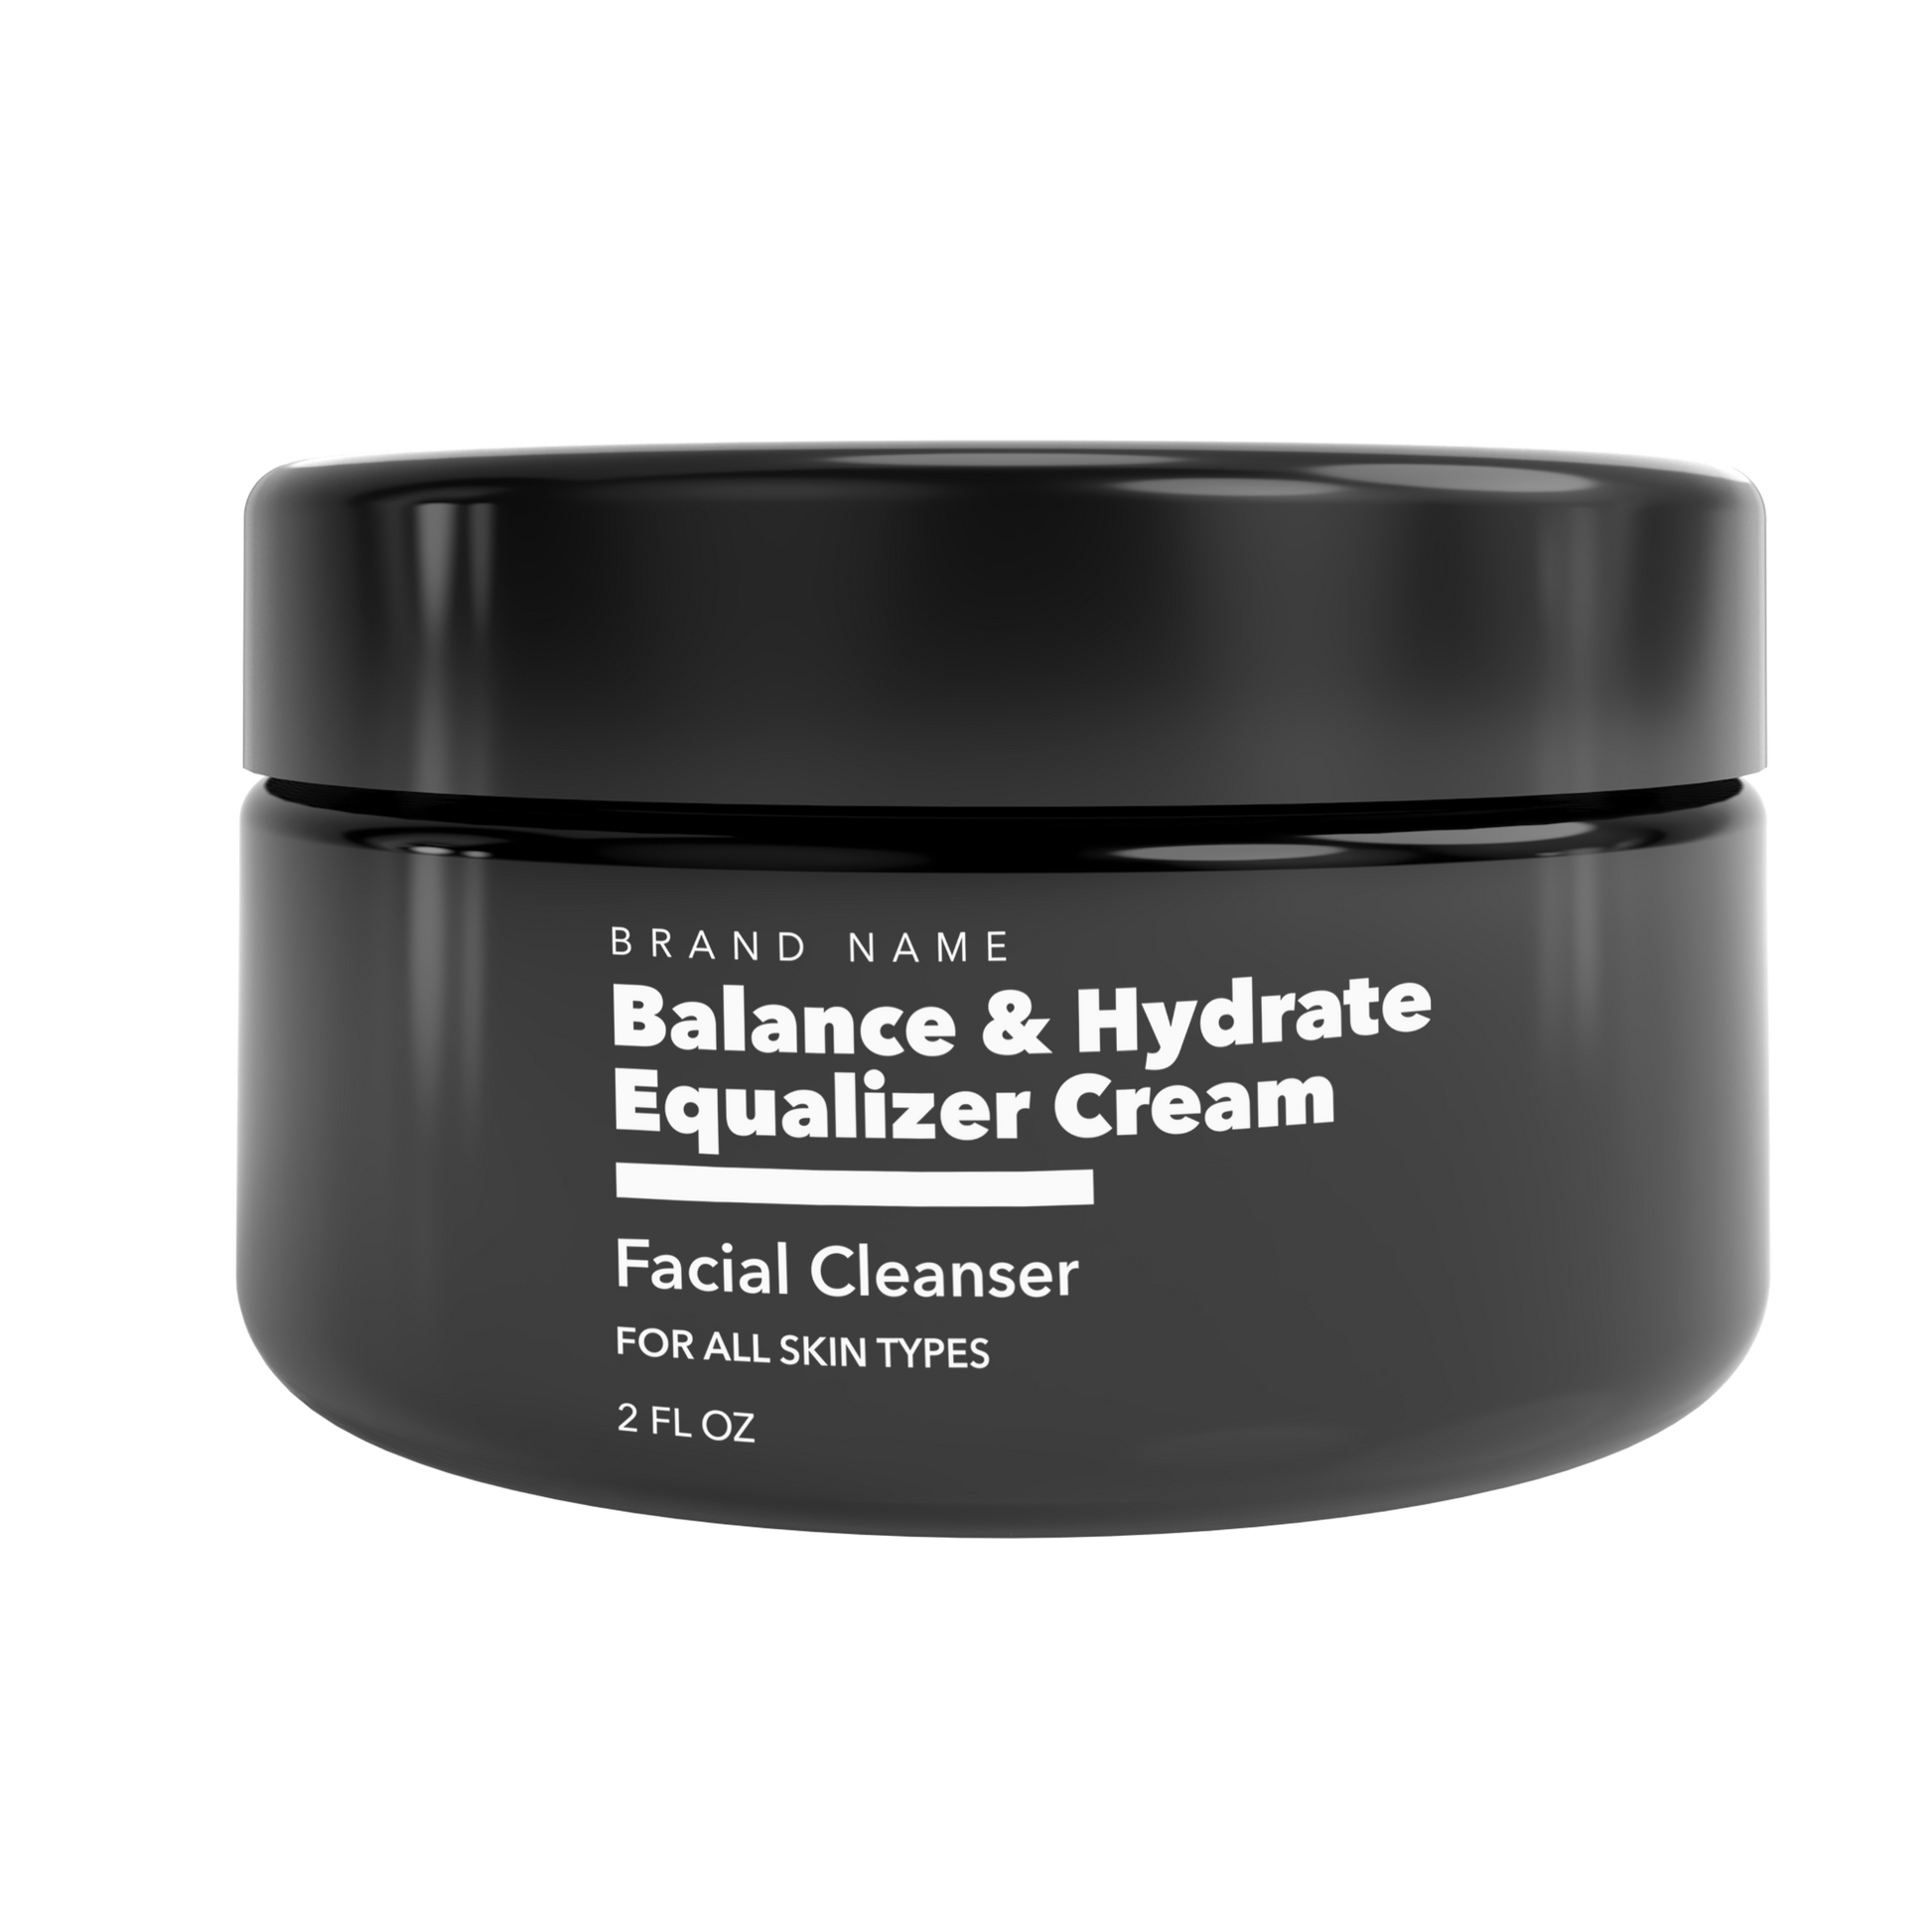 Balance & Hydrate Equalizer Cream Facial Cleanser Private Label White Label Skincare Start Your own Brand